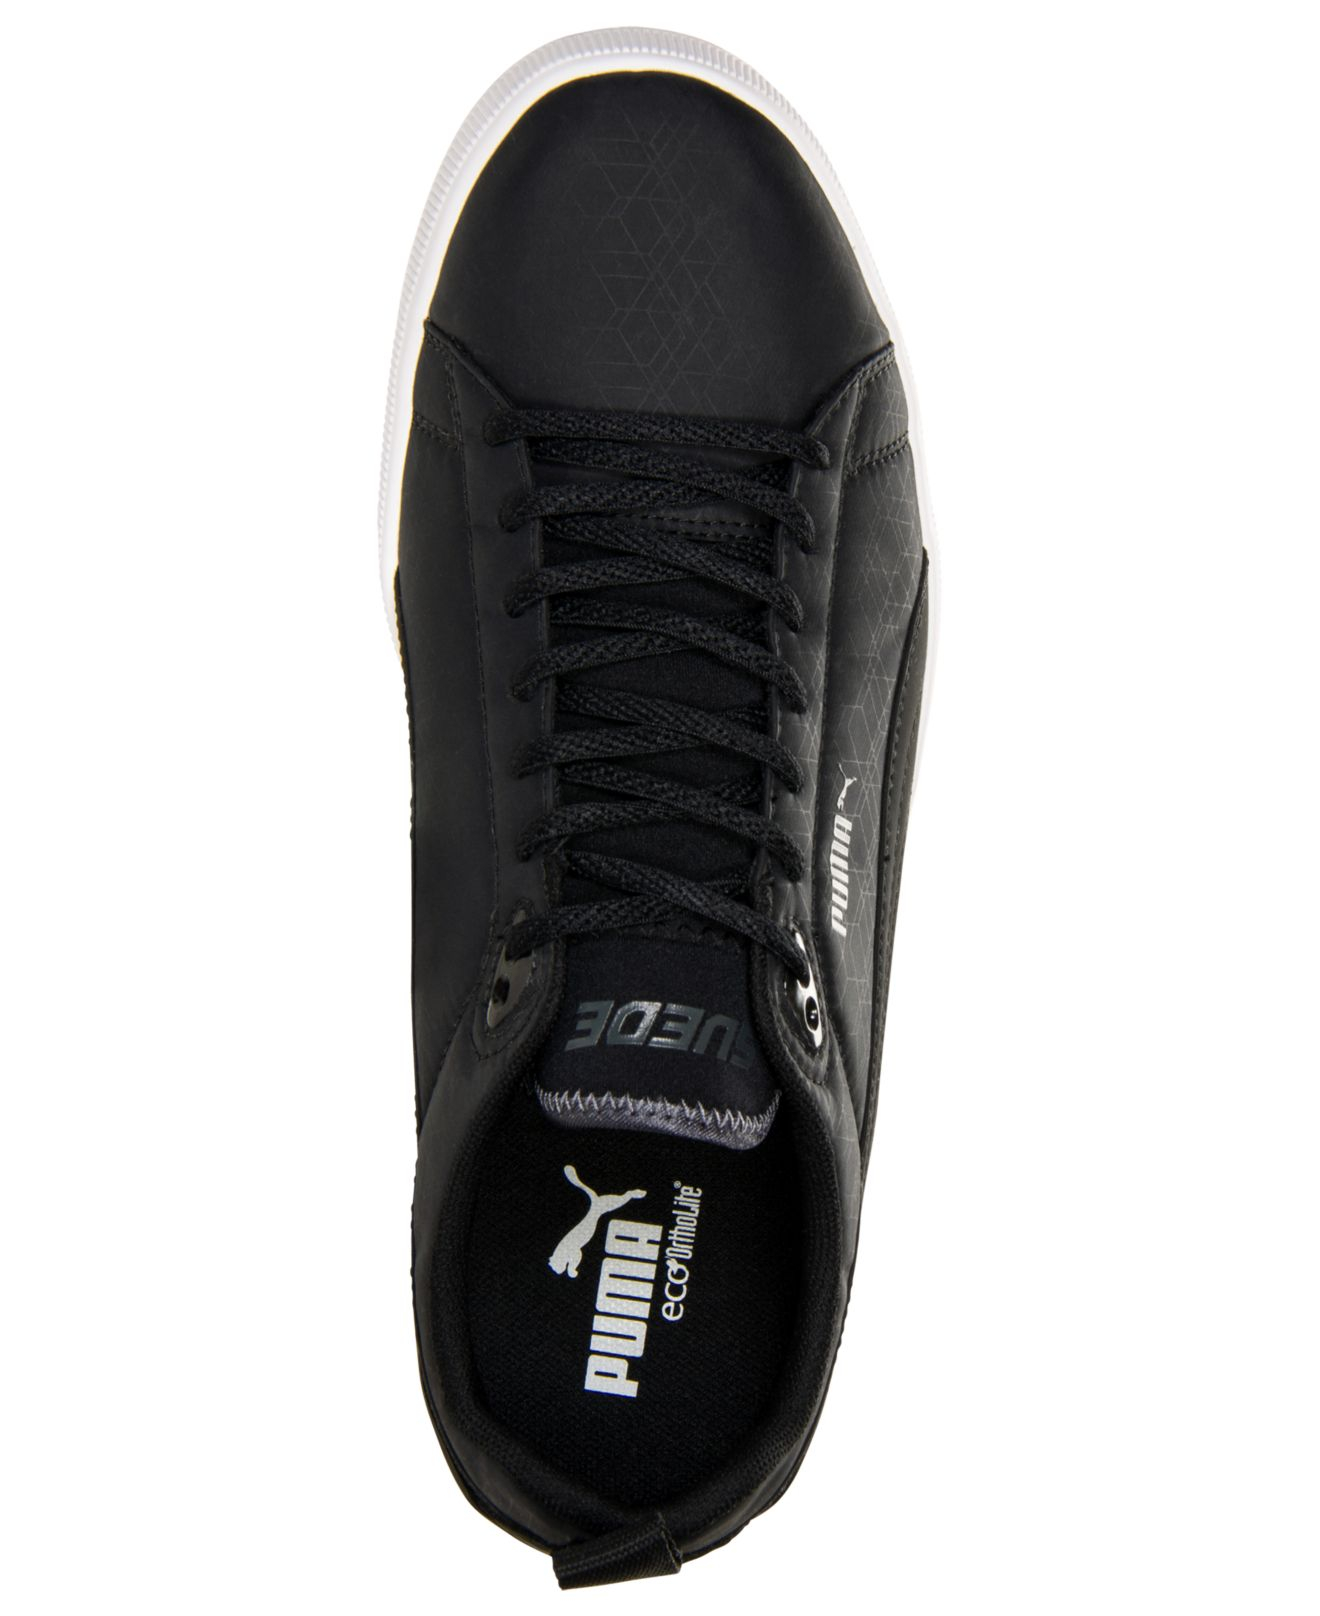 Lyst - PUMA Men'S Future Suede Lite Rt Sneakers From Finish Line in ...